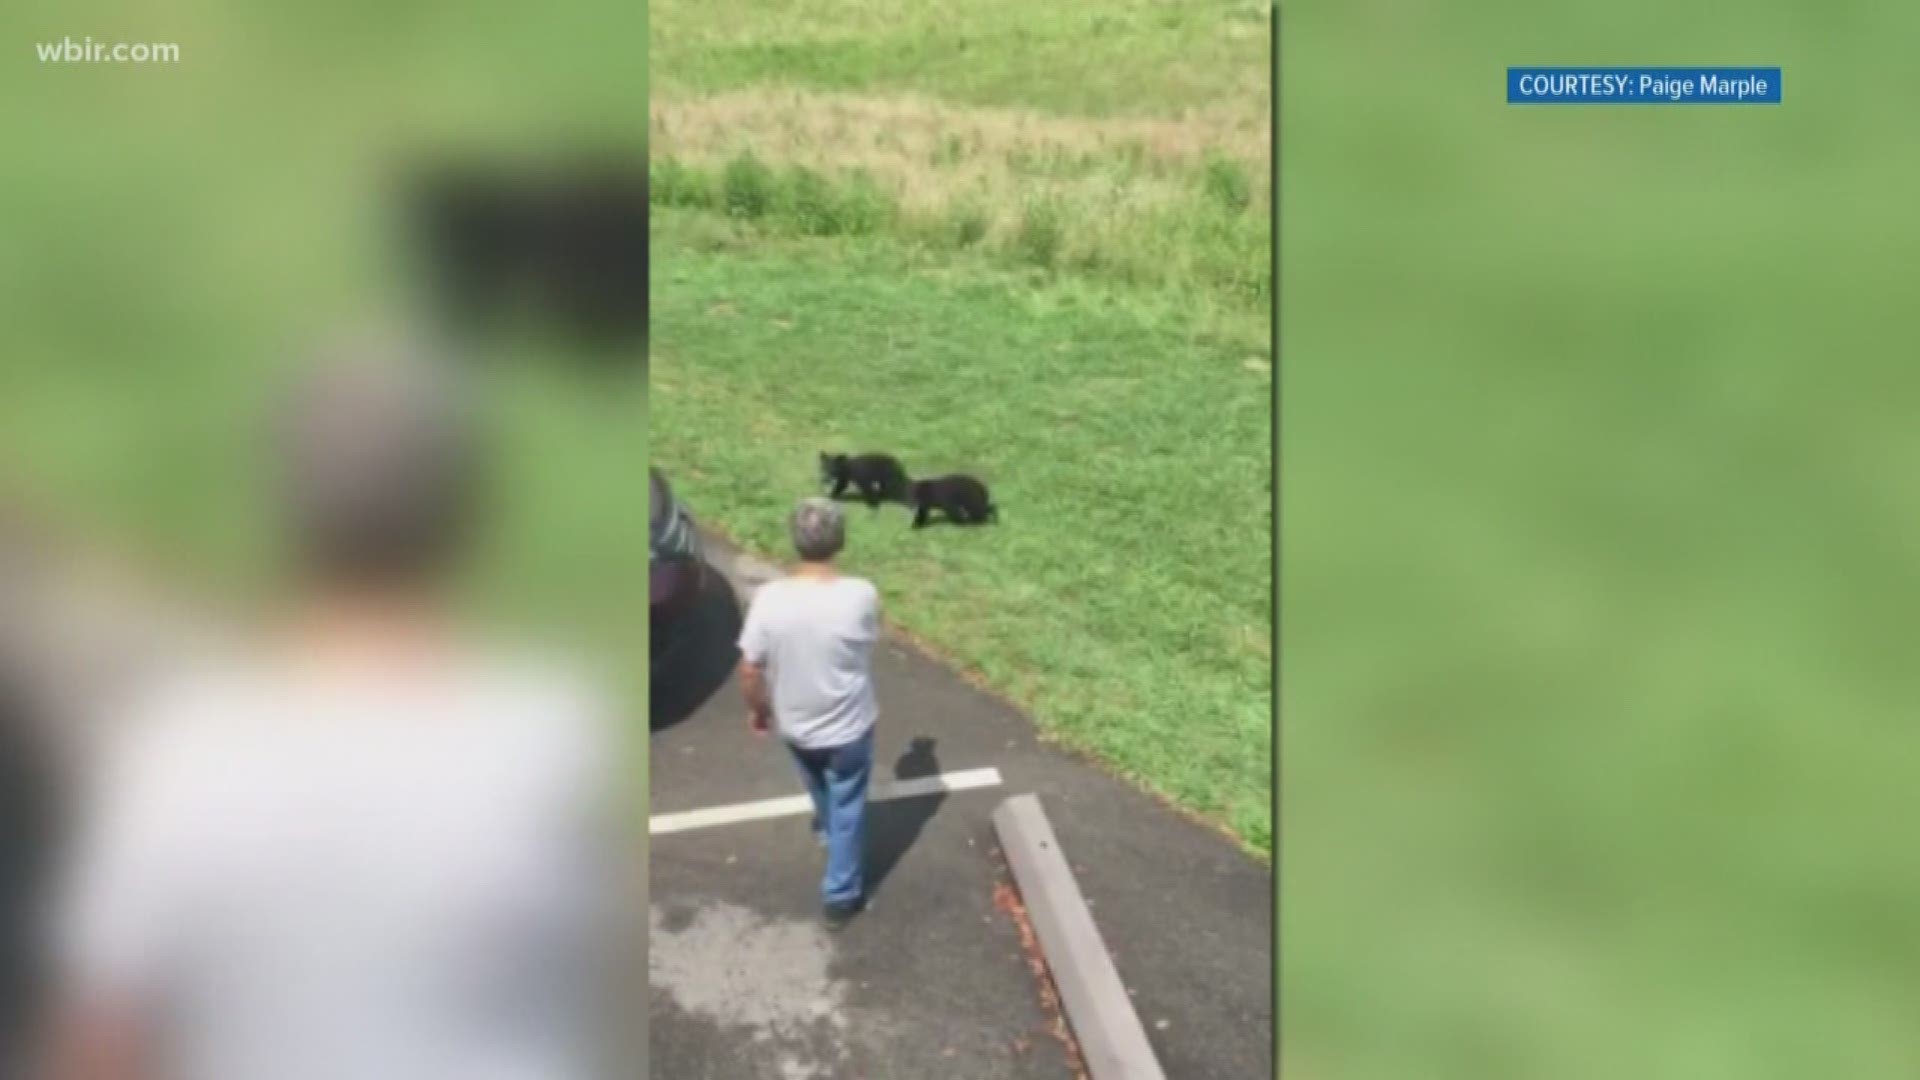 The national park is responding to a video of a man confronting a mother bear and her cubs.